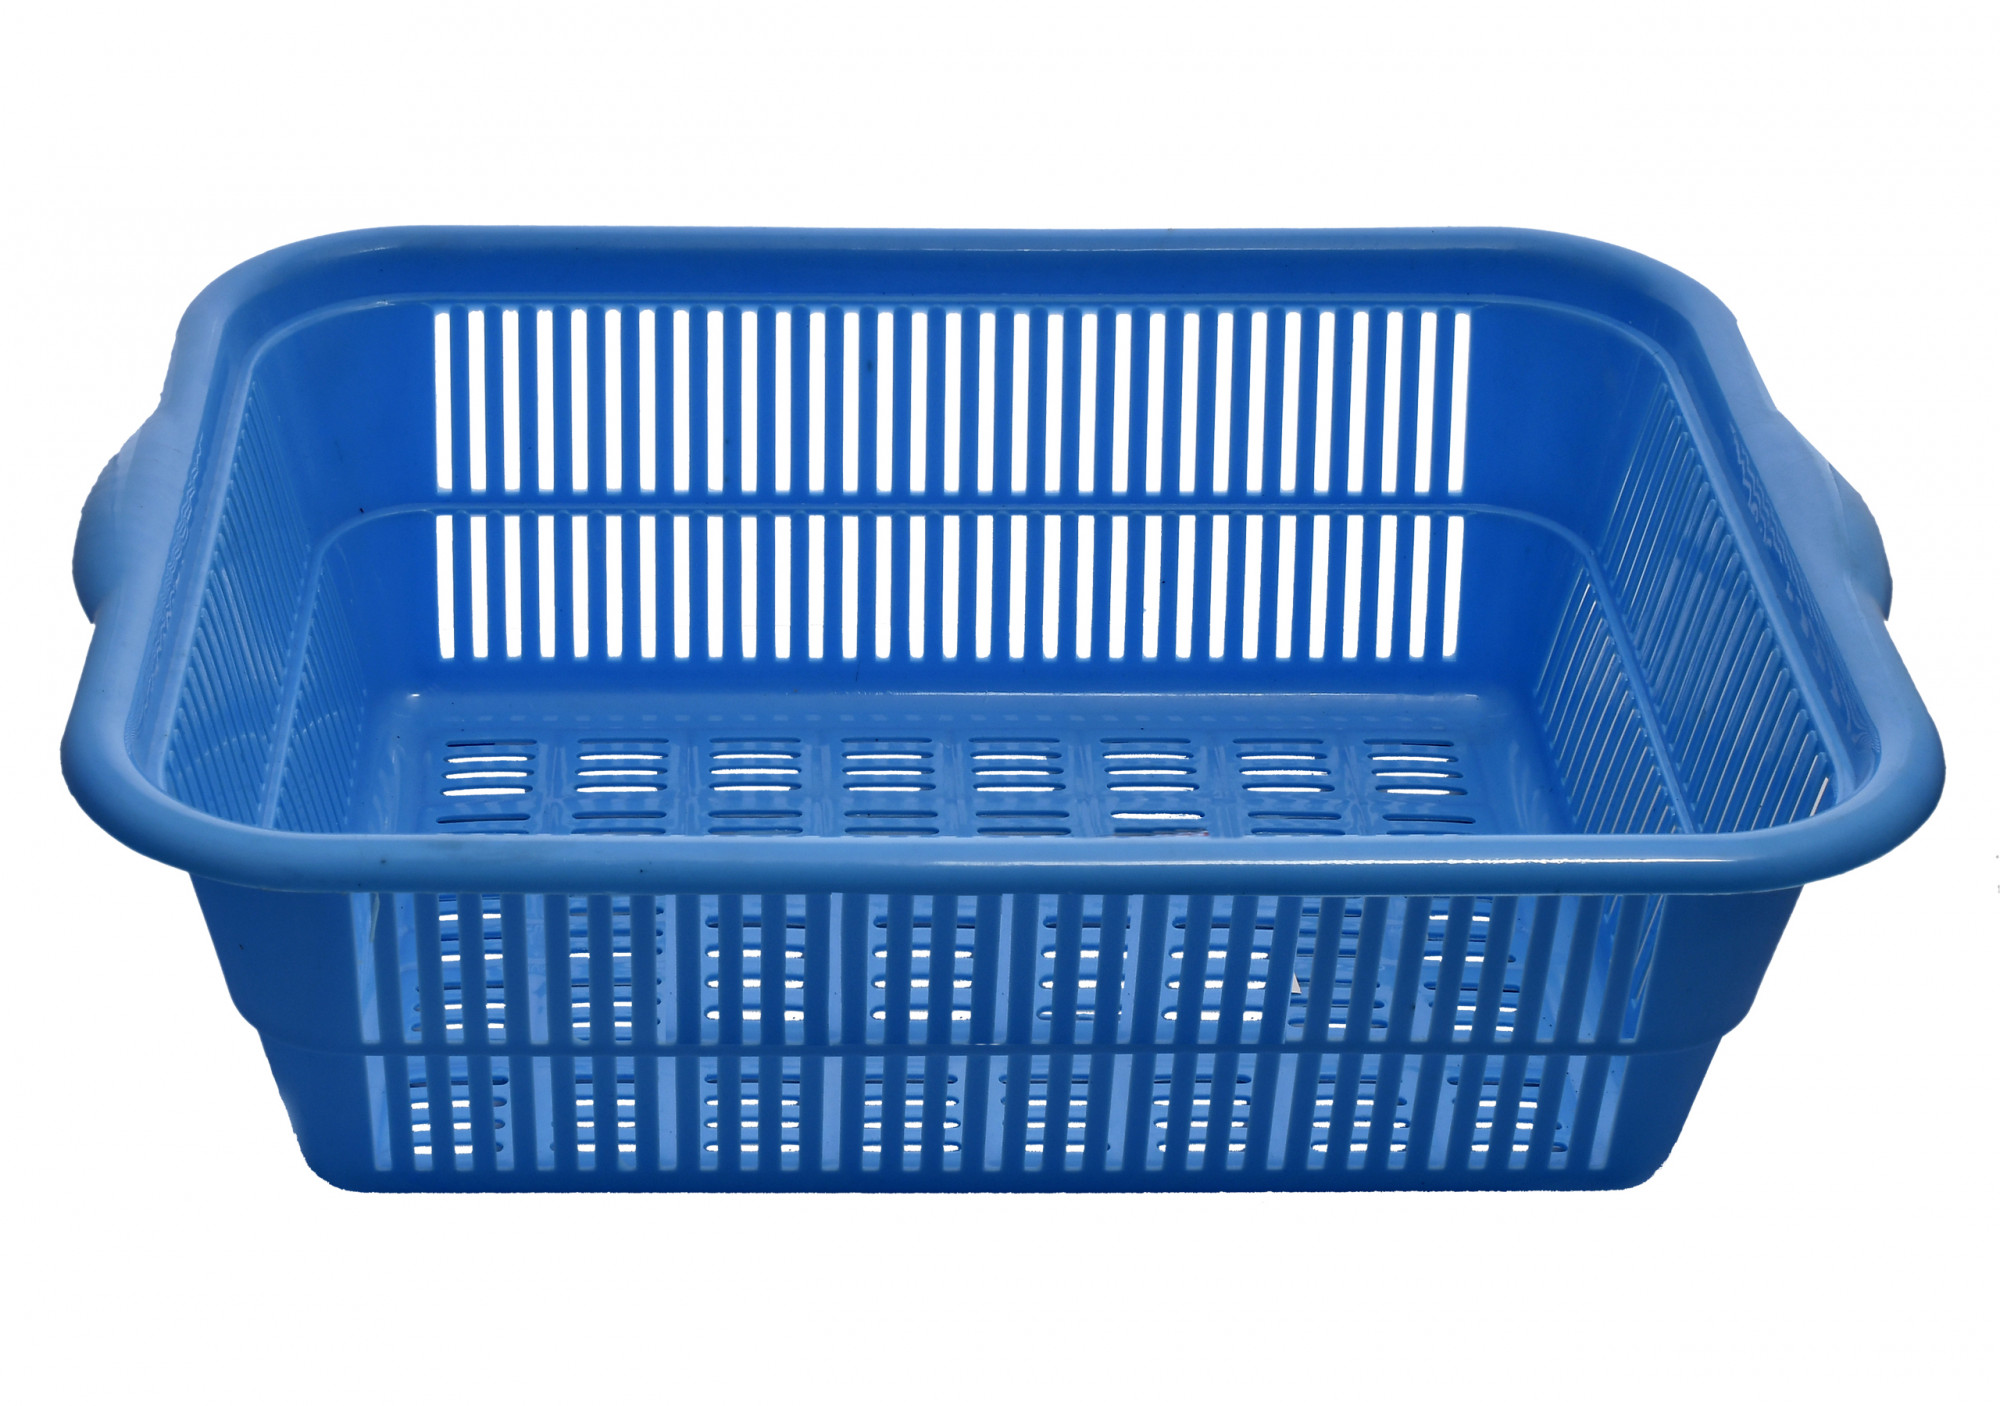 Kuber Industries Plastic Kitchen Dish Rack Drainer Vegetables And Fruits Basket Dish Rack Multipurpose Organizers,Small Size ,Small Size,Green & Blue